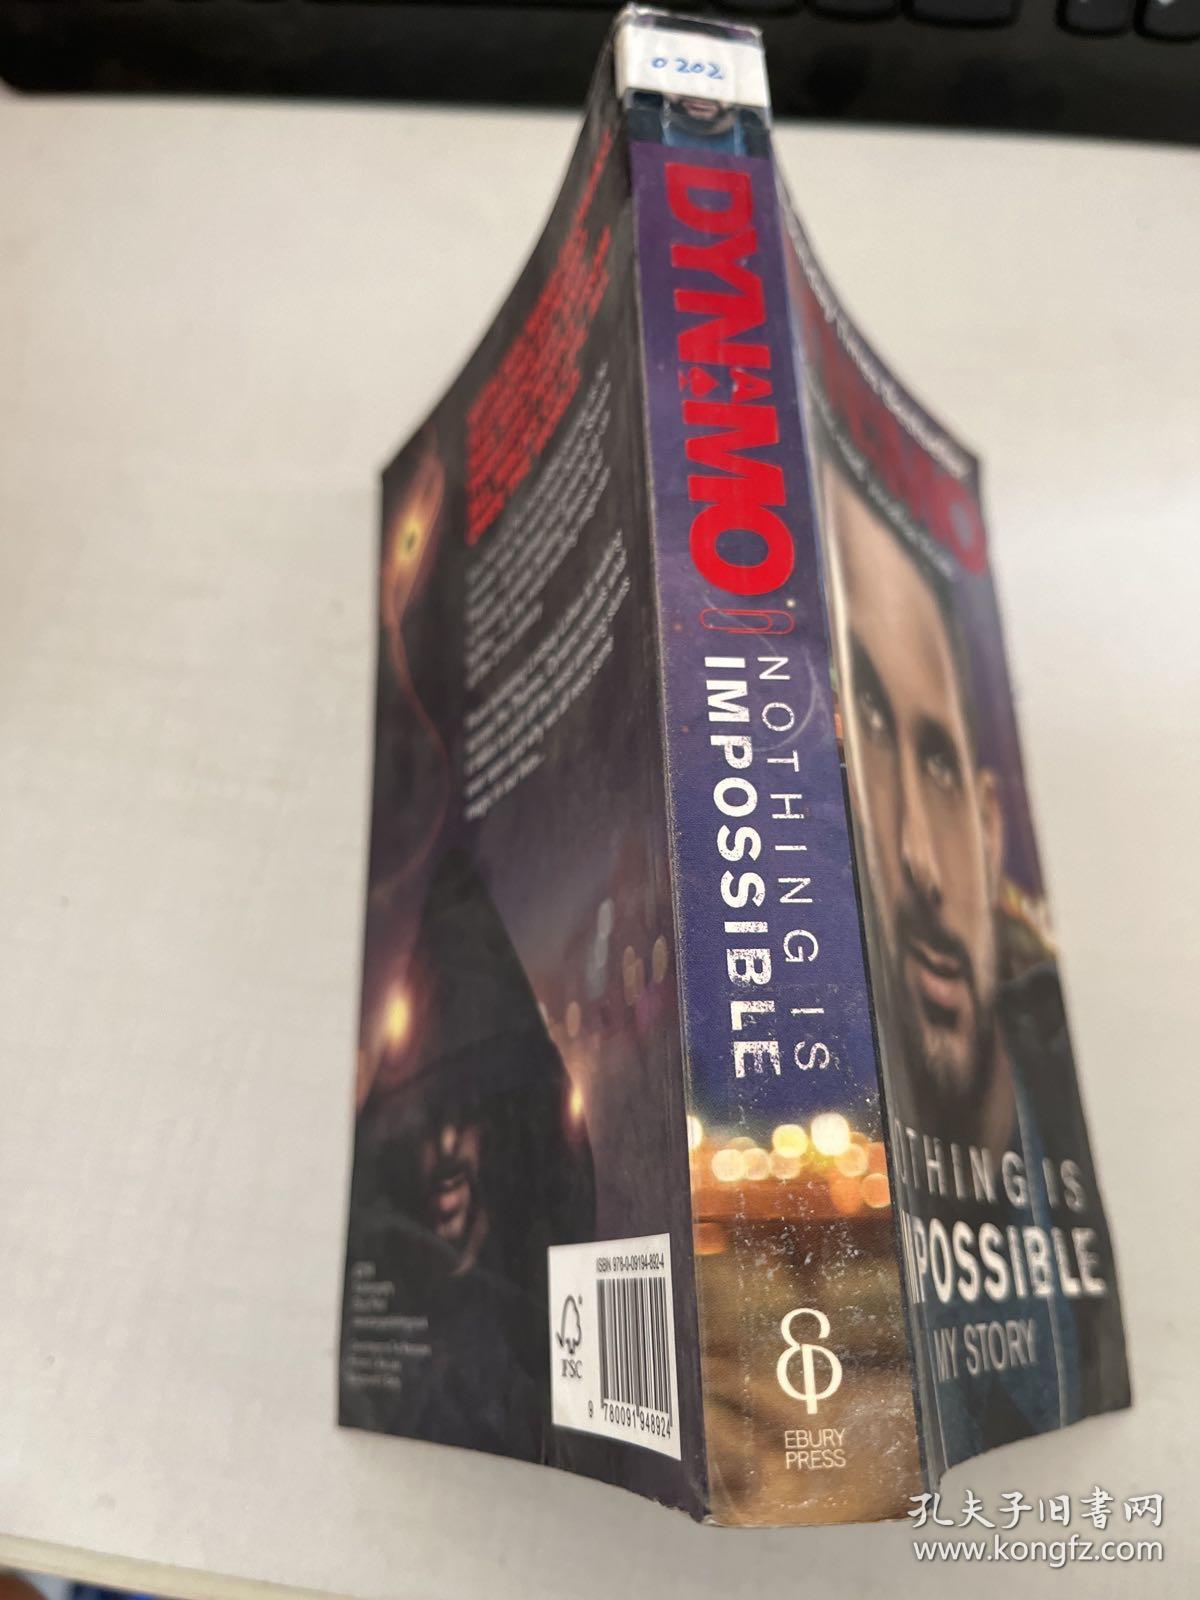 the sunday times bestseller dynamo